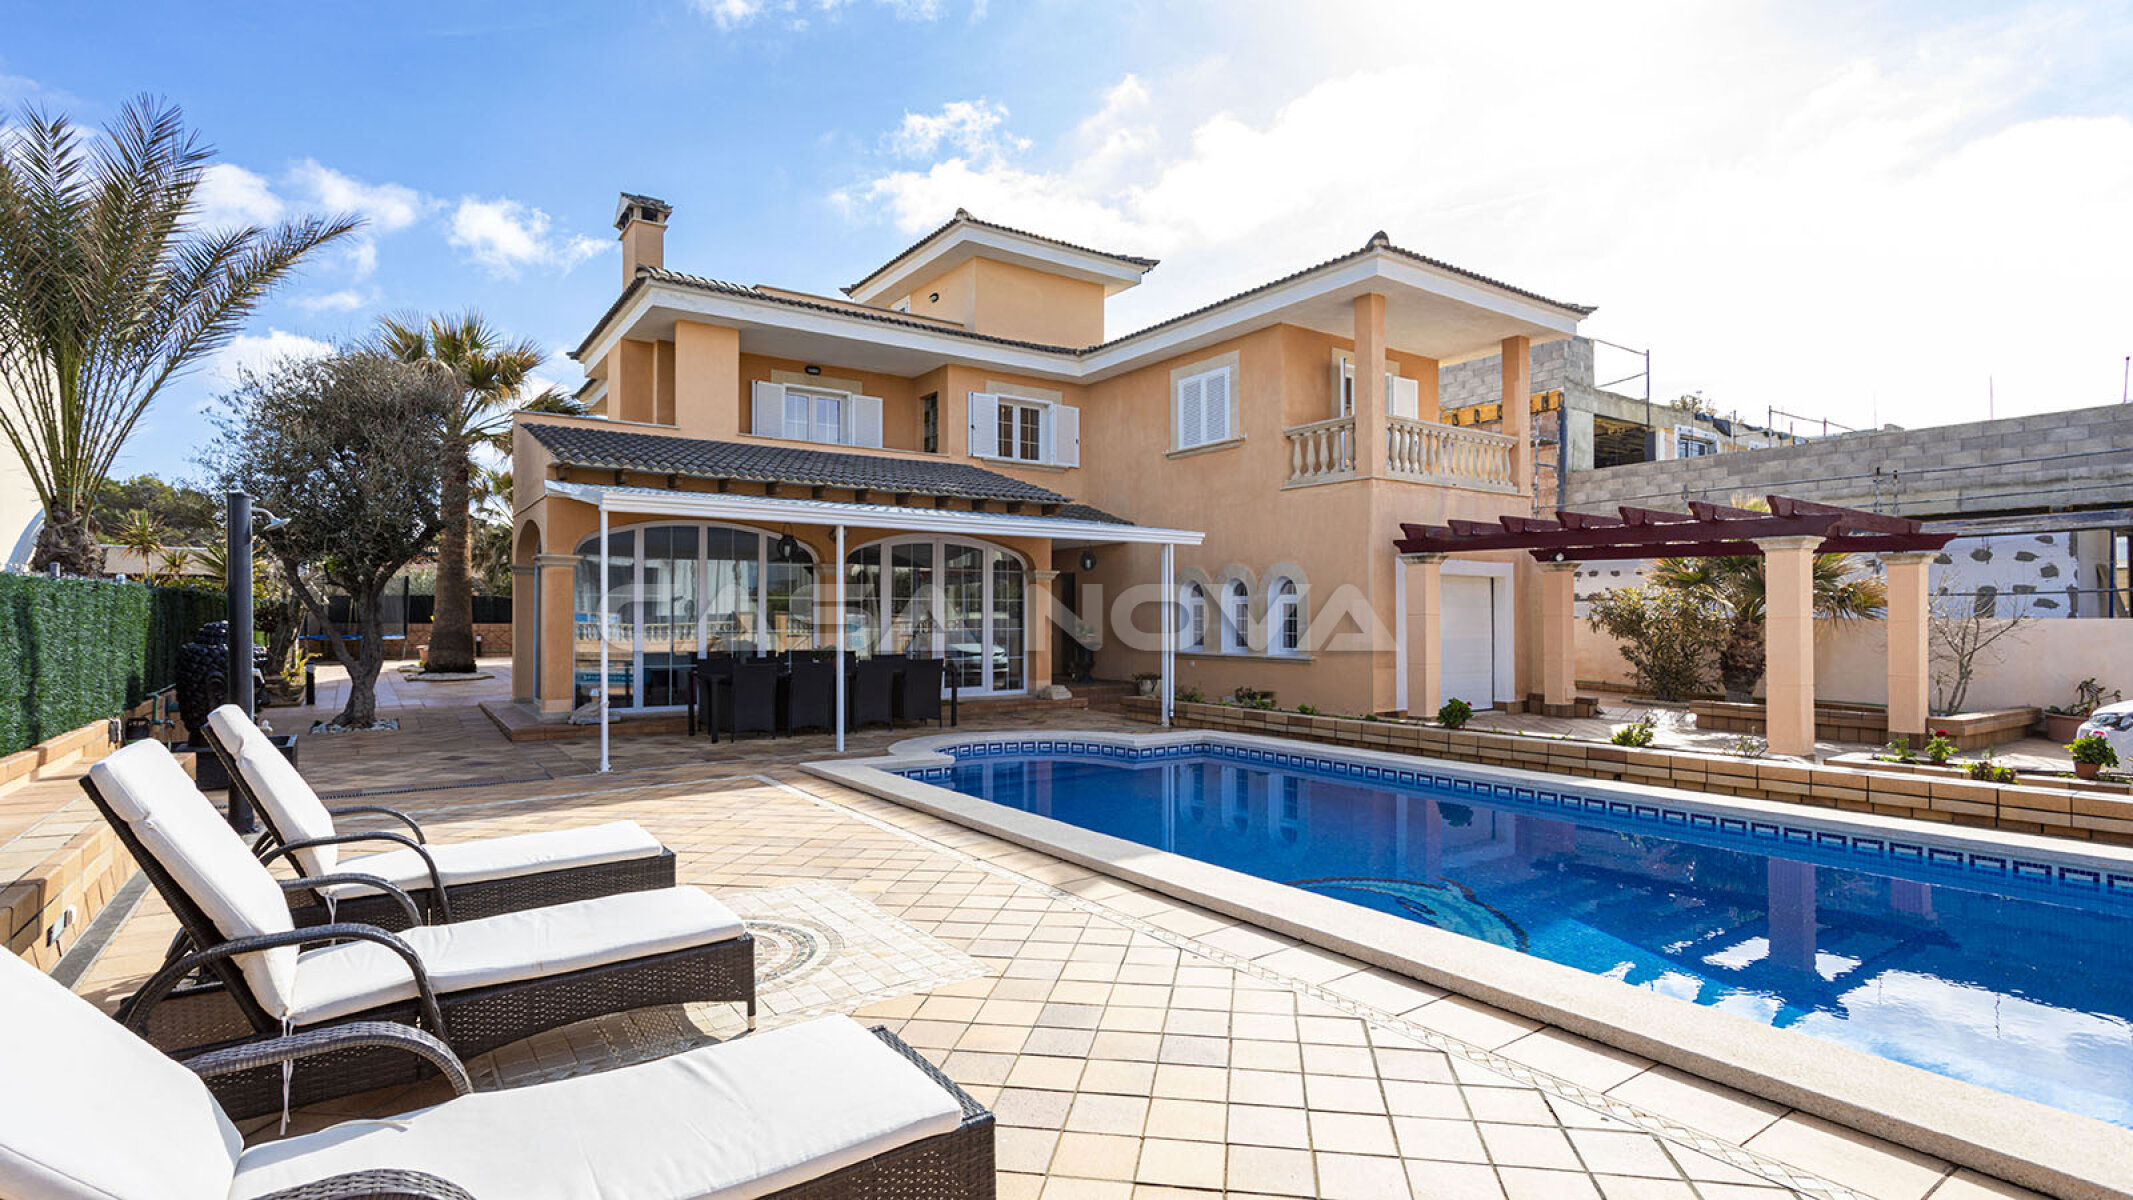 Mallorca Villa with pool in very exclusive residential area